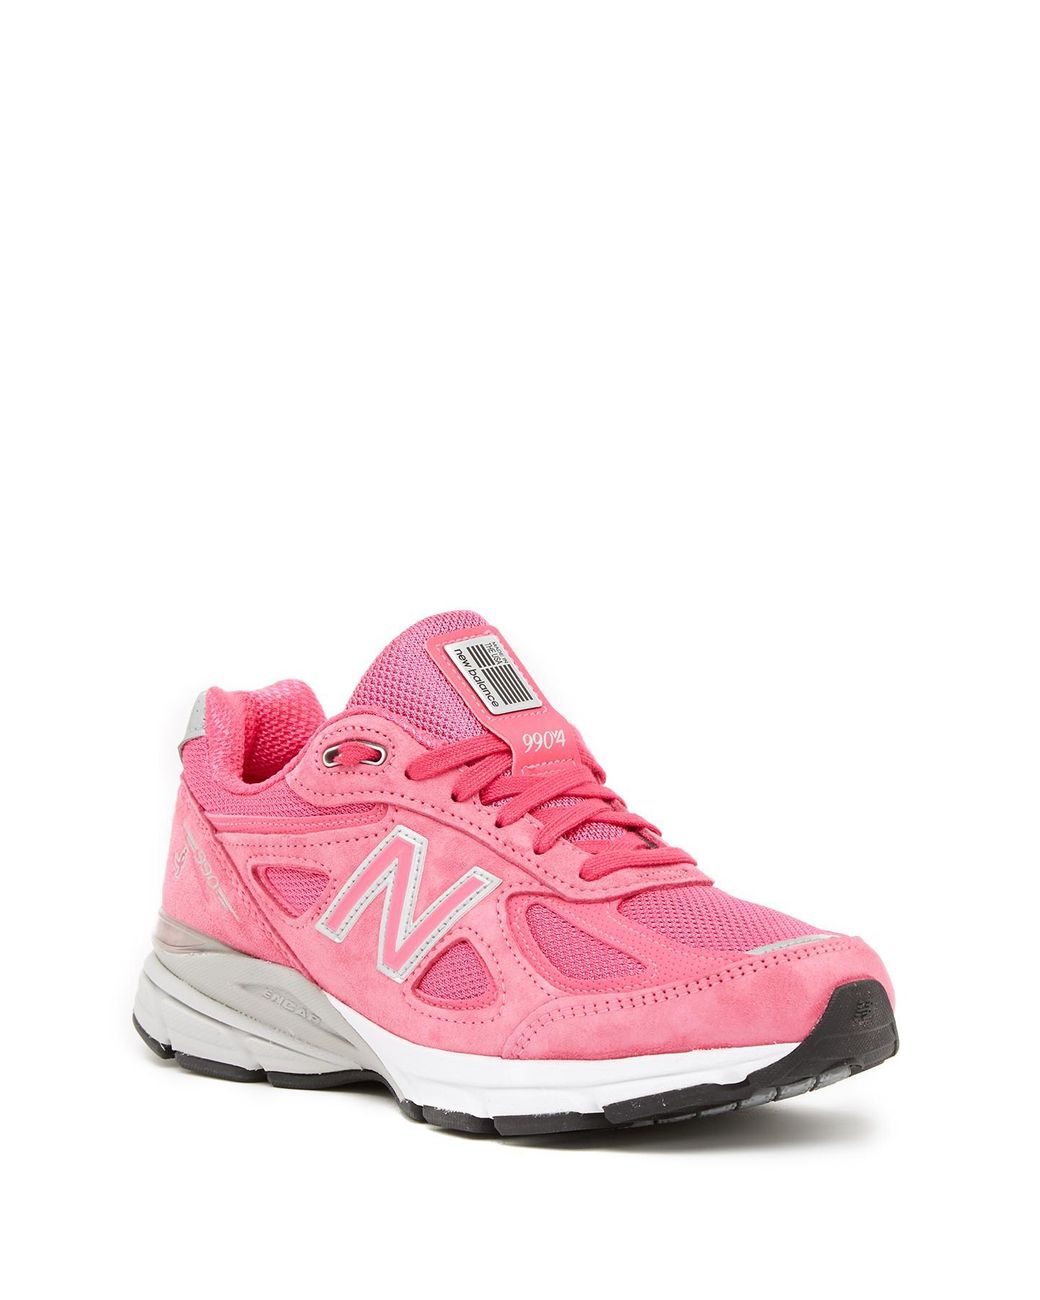 New Balance 990 Susan G. Komen Limited Edition Sneaker in Pink | Lyst